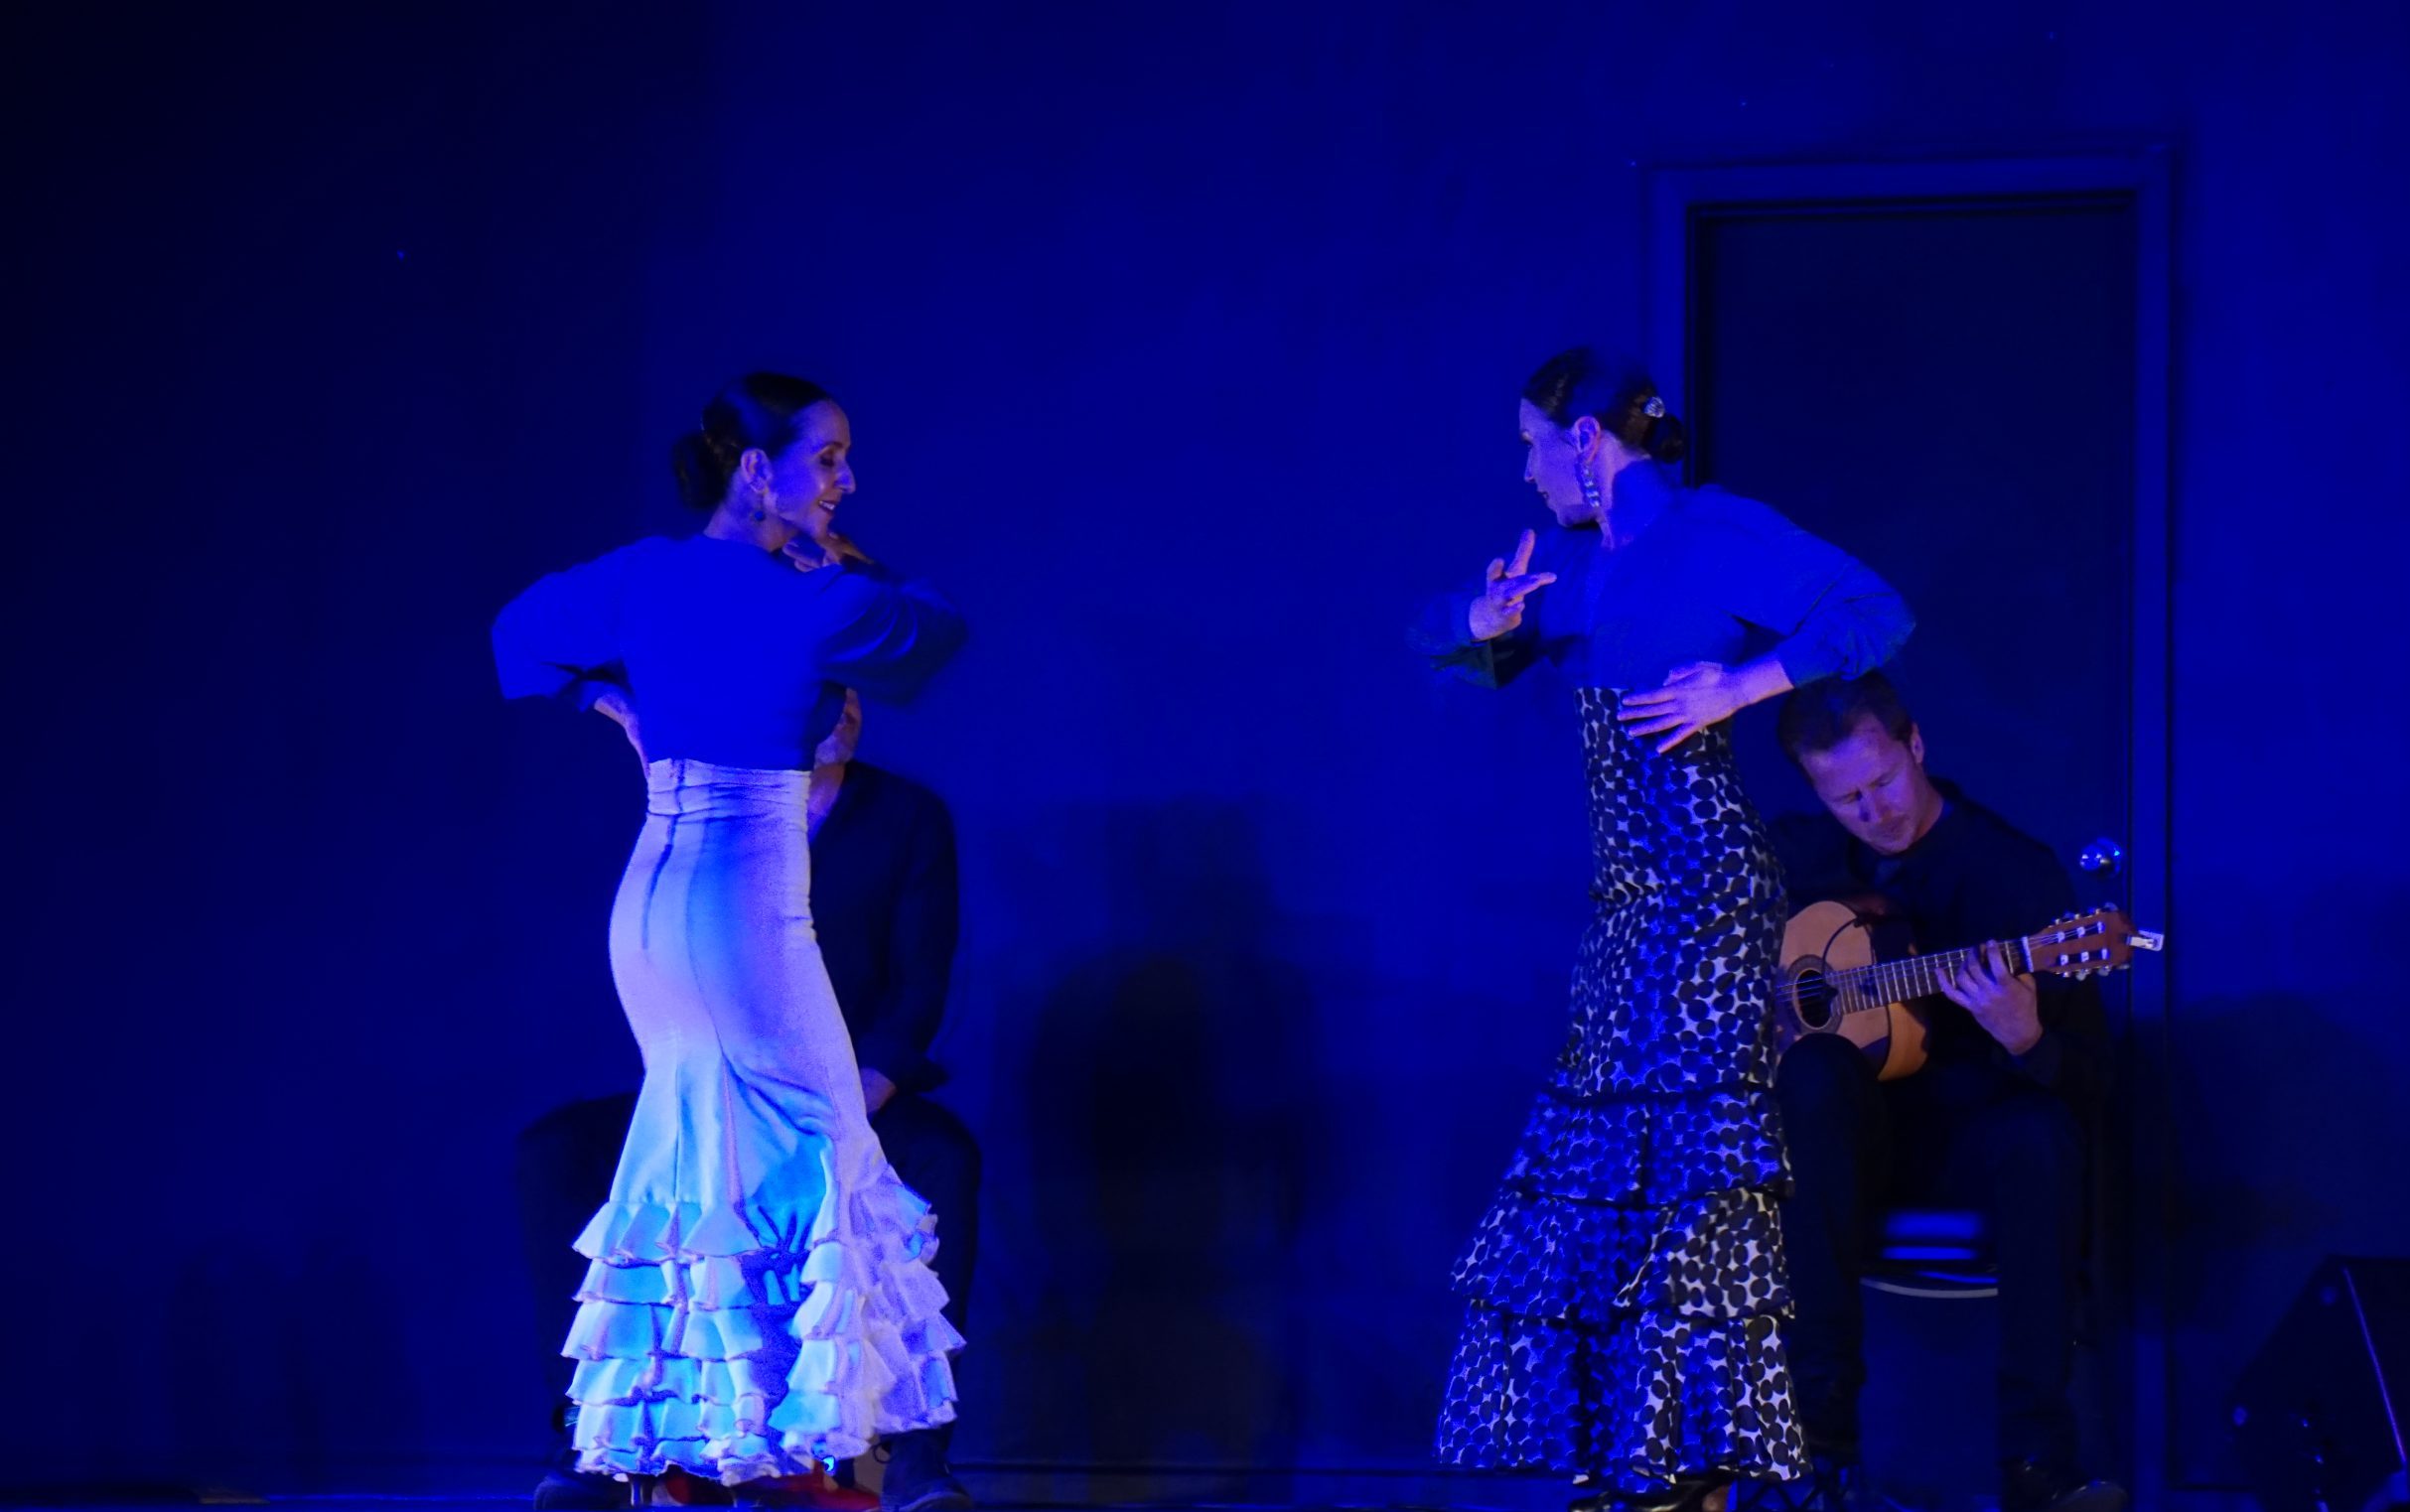 Bandaluzia Flamenco brings south of Spain’s culture to town stage